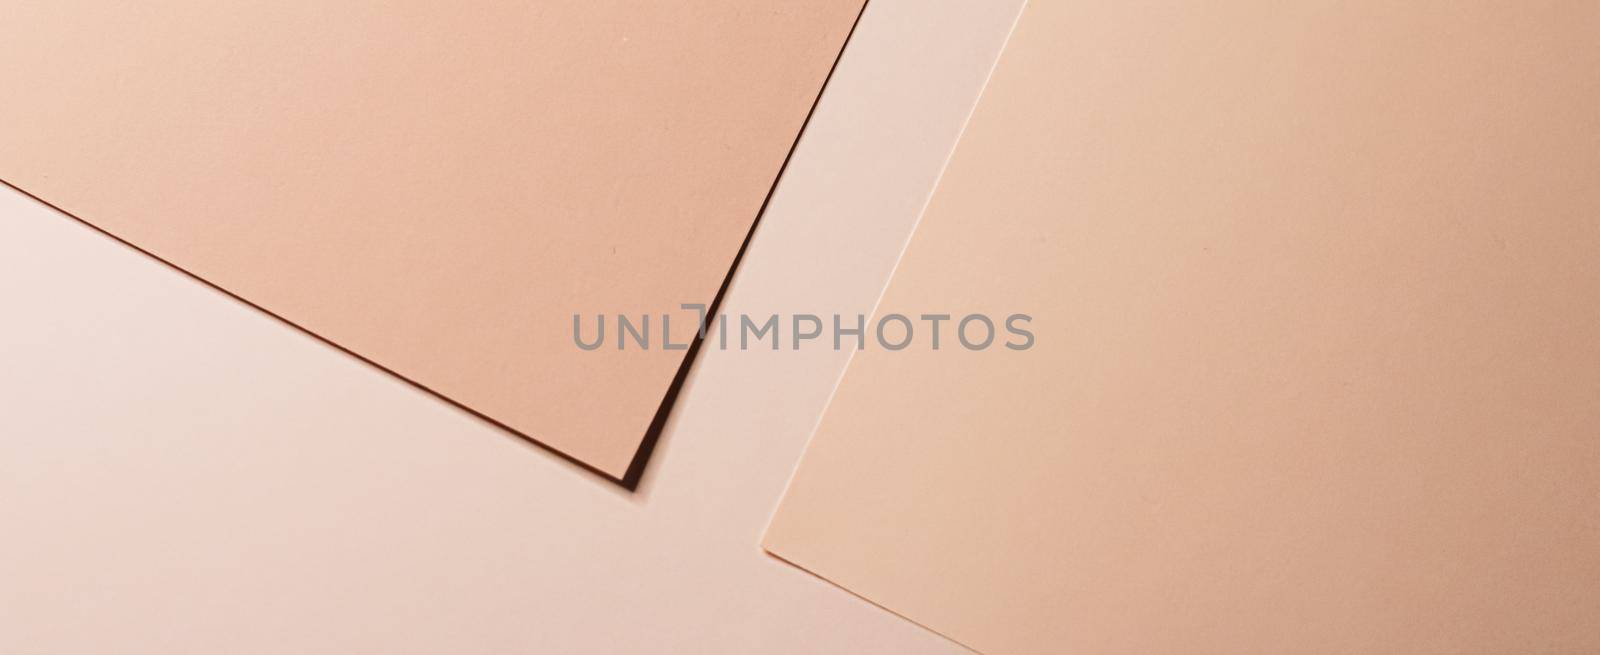 Beige A4 papers as office stationery flatlay, luxury branding flat lay and brand identity design for mockups